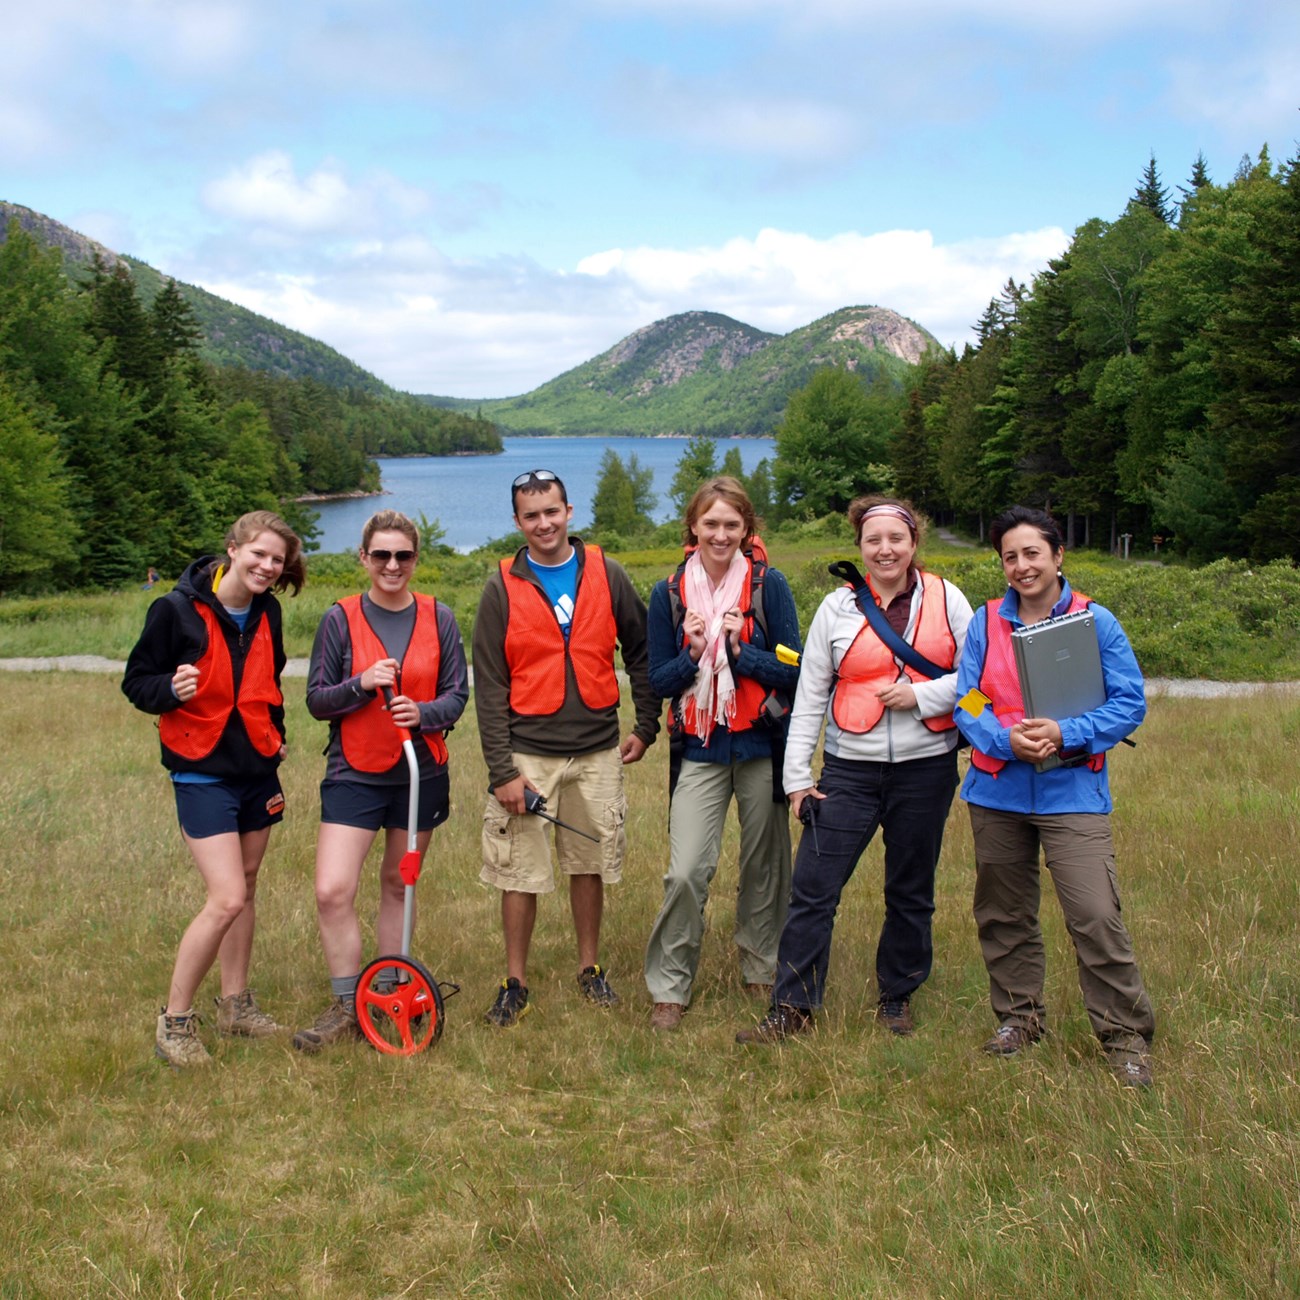 Interns during field trip to Acadia, posing in safety vests and work gear in front of Jordan Pond.